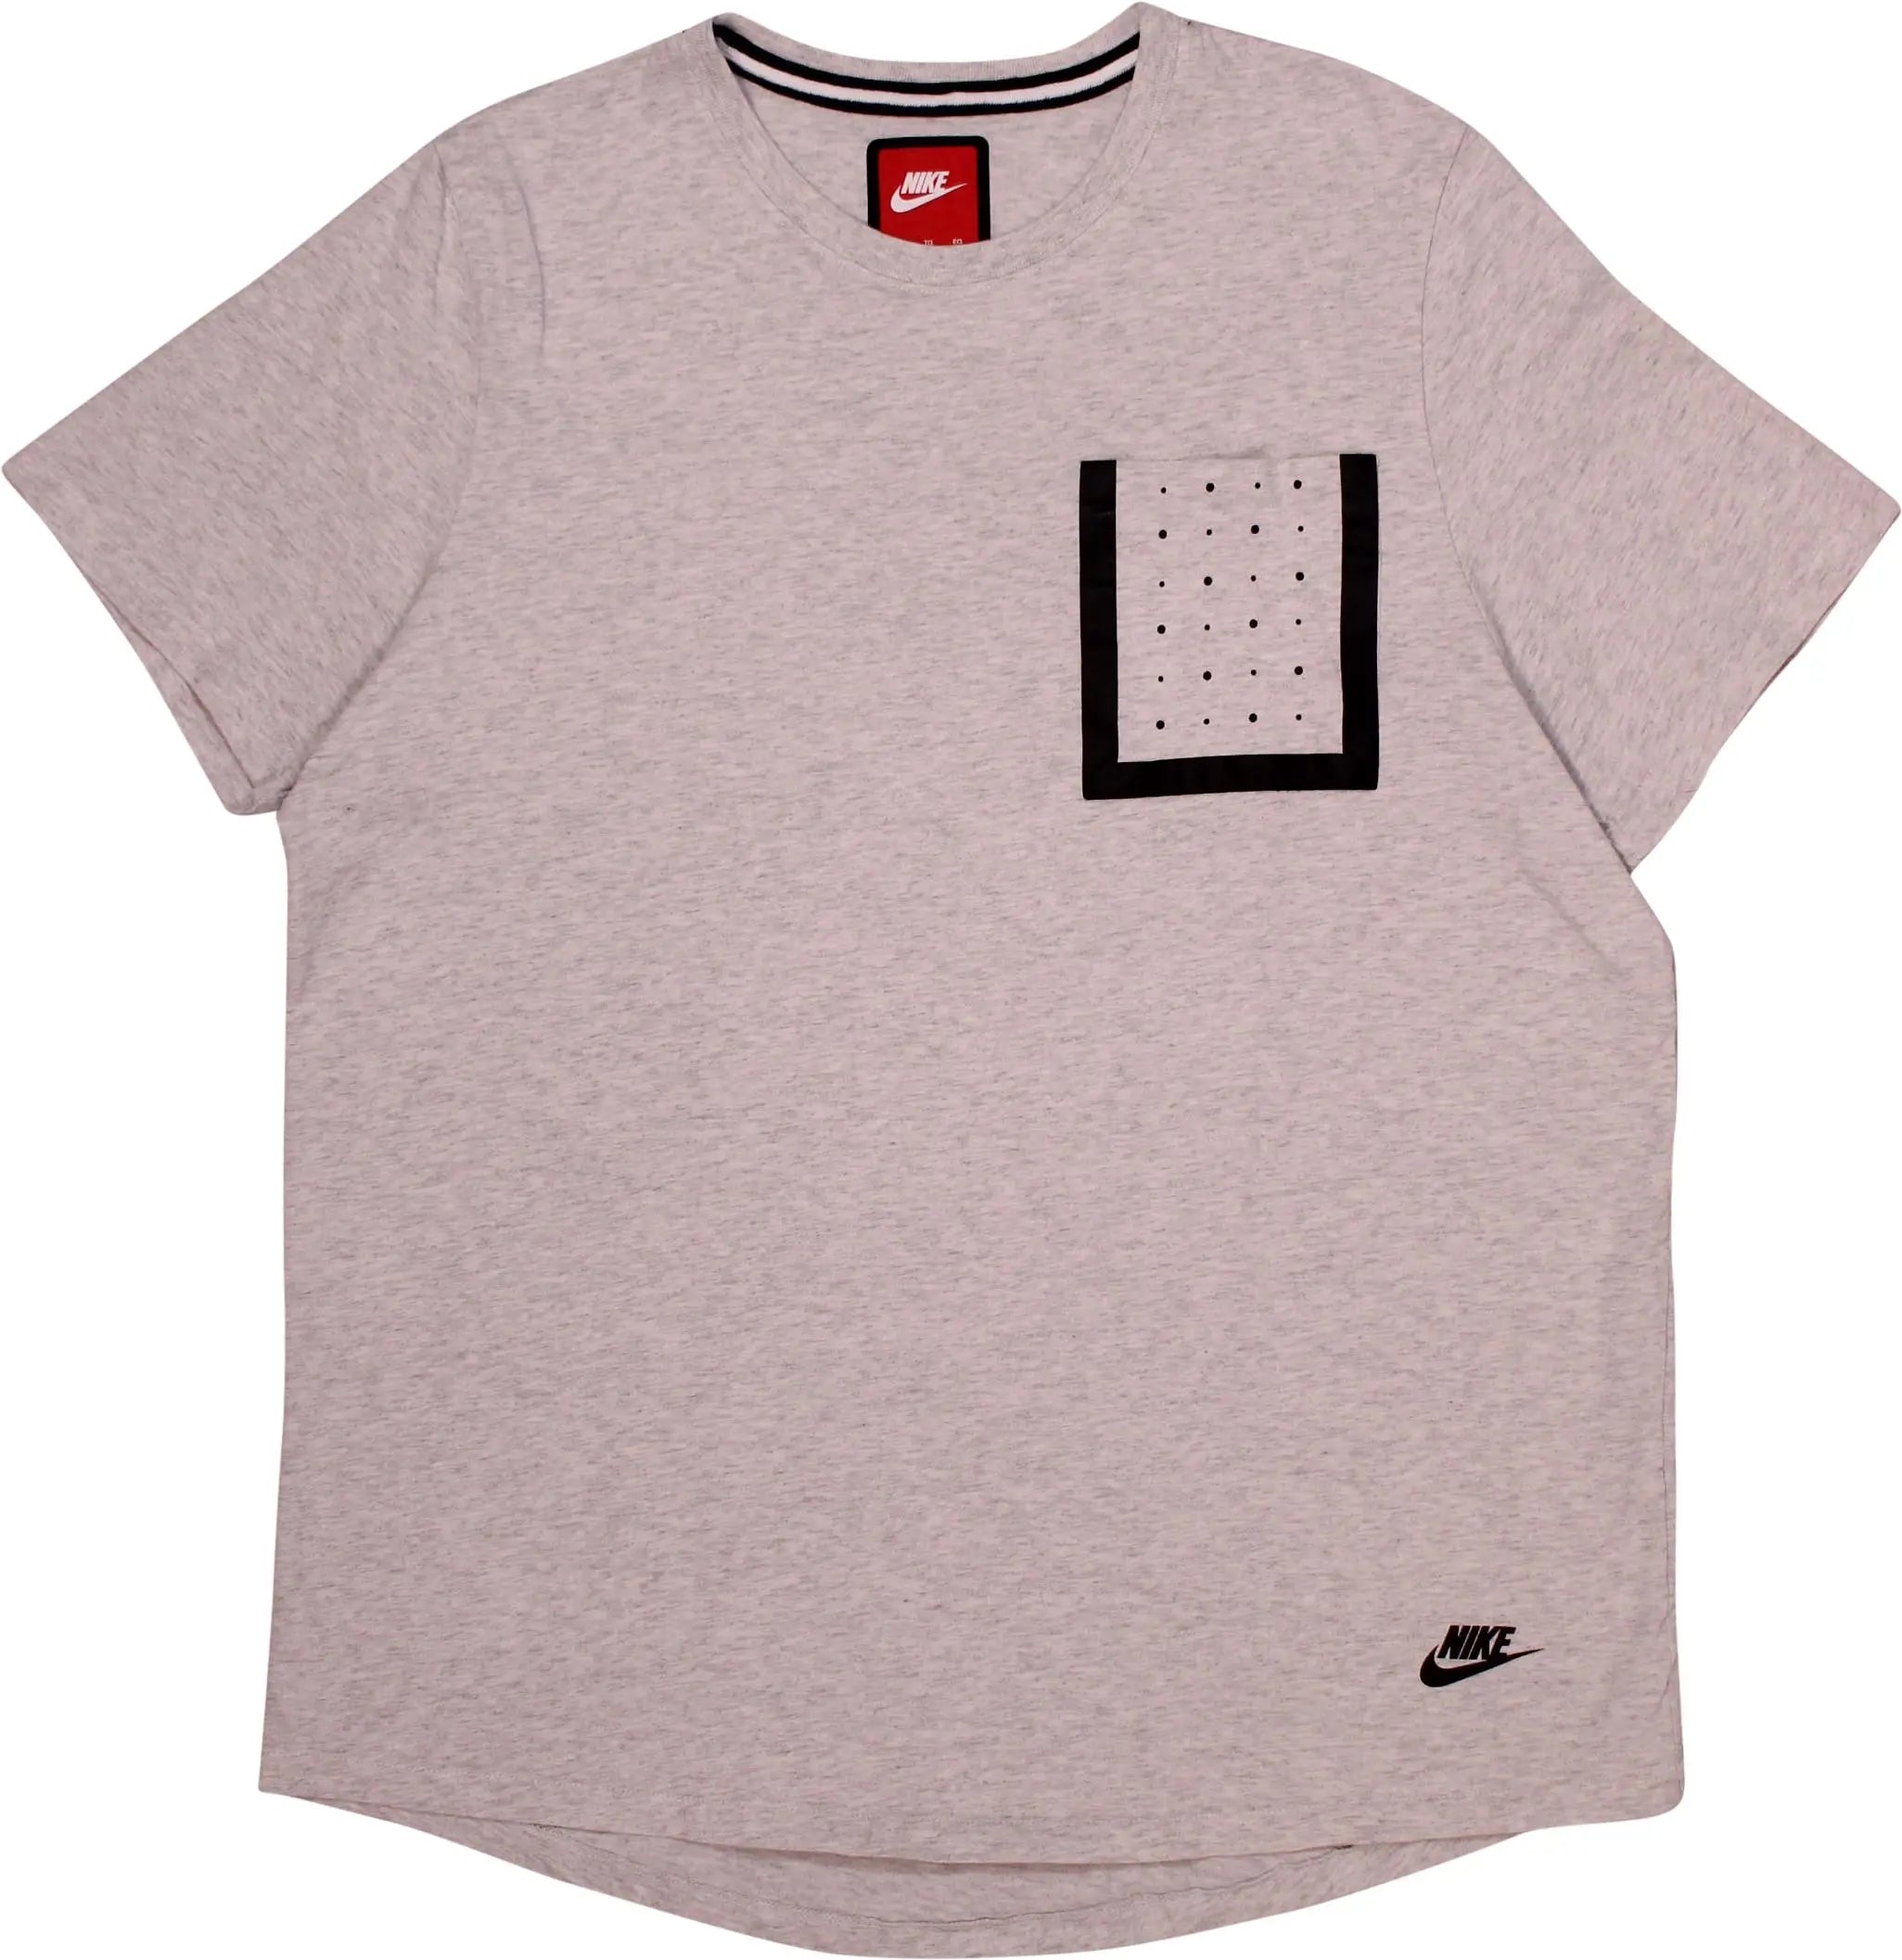 Nike - Grey T-shirt by Nike- ThriftTale.com - Vintage and second handclothing